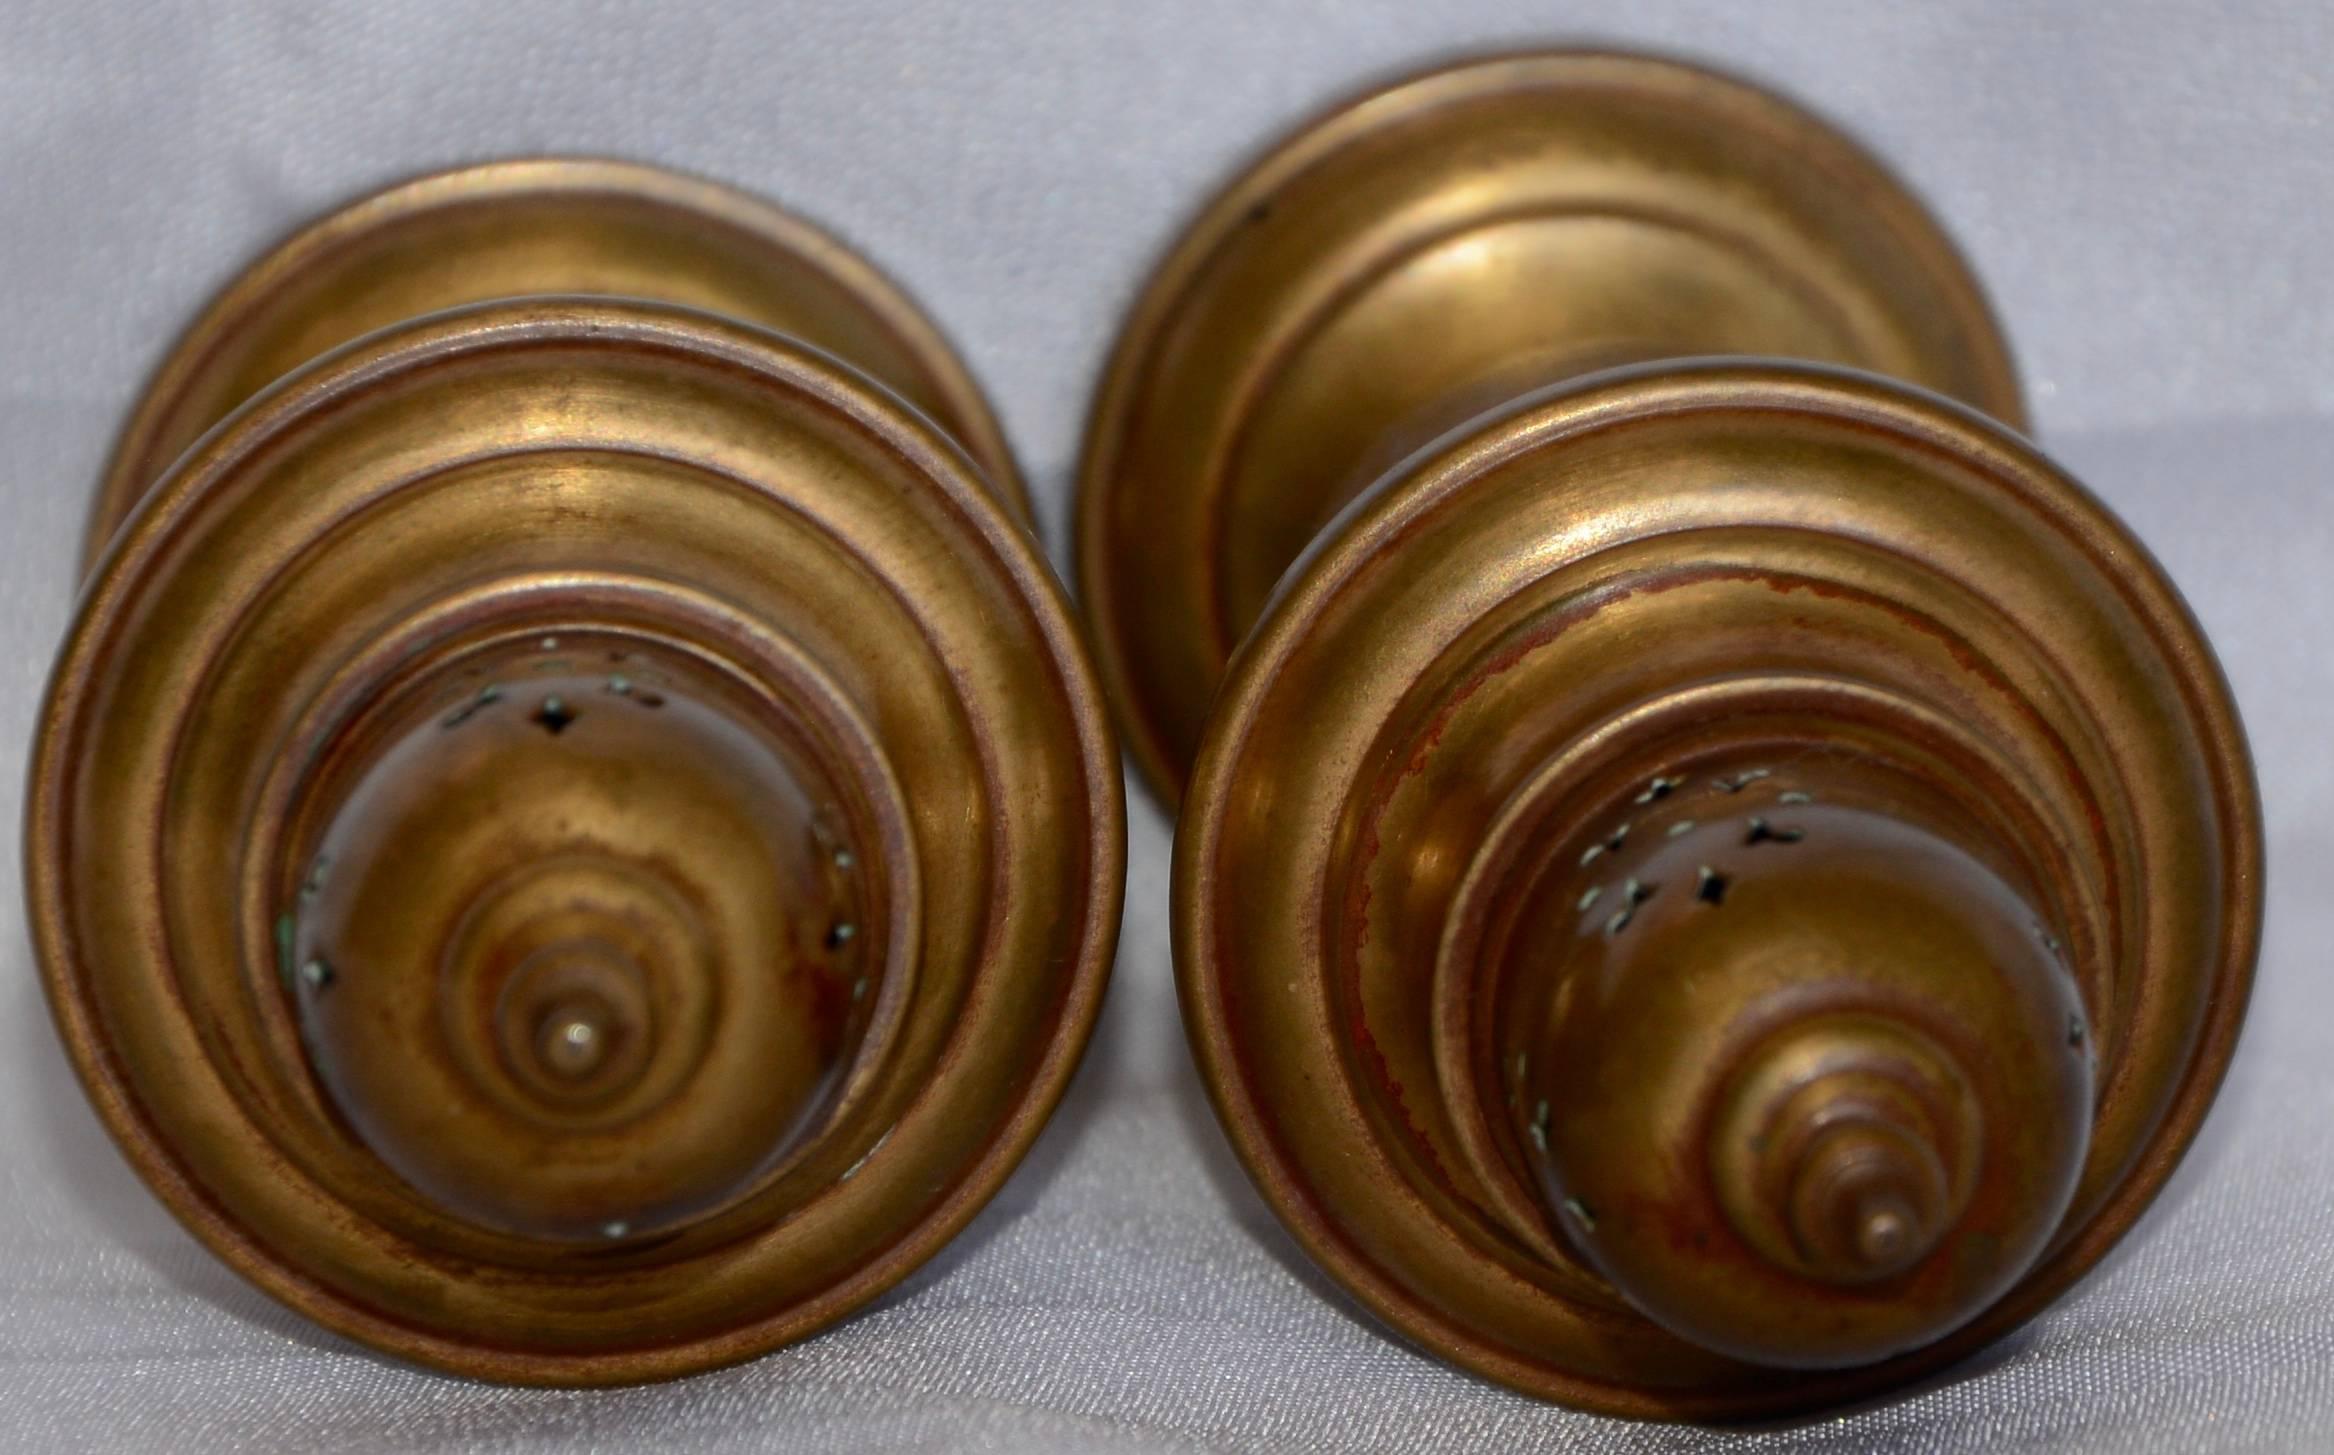 Copper Salt and Pepper Shakers Gorham In Fair Condition For Sale In Cookeville, TN